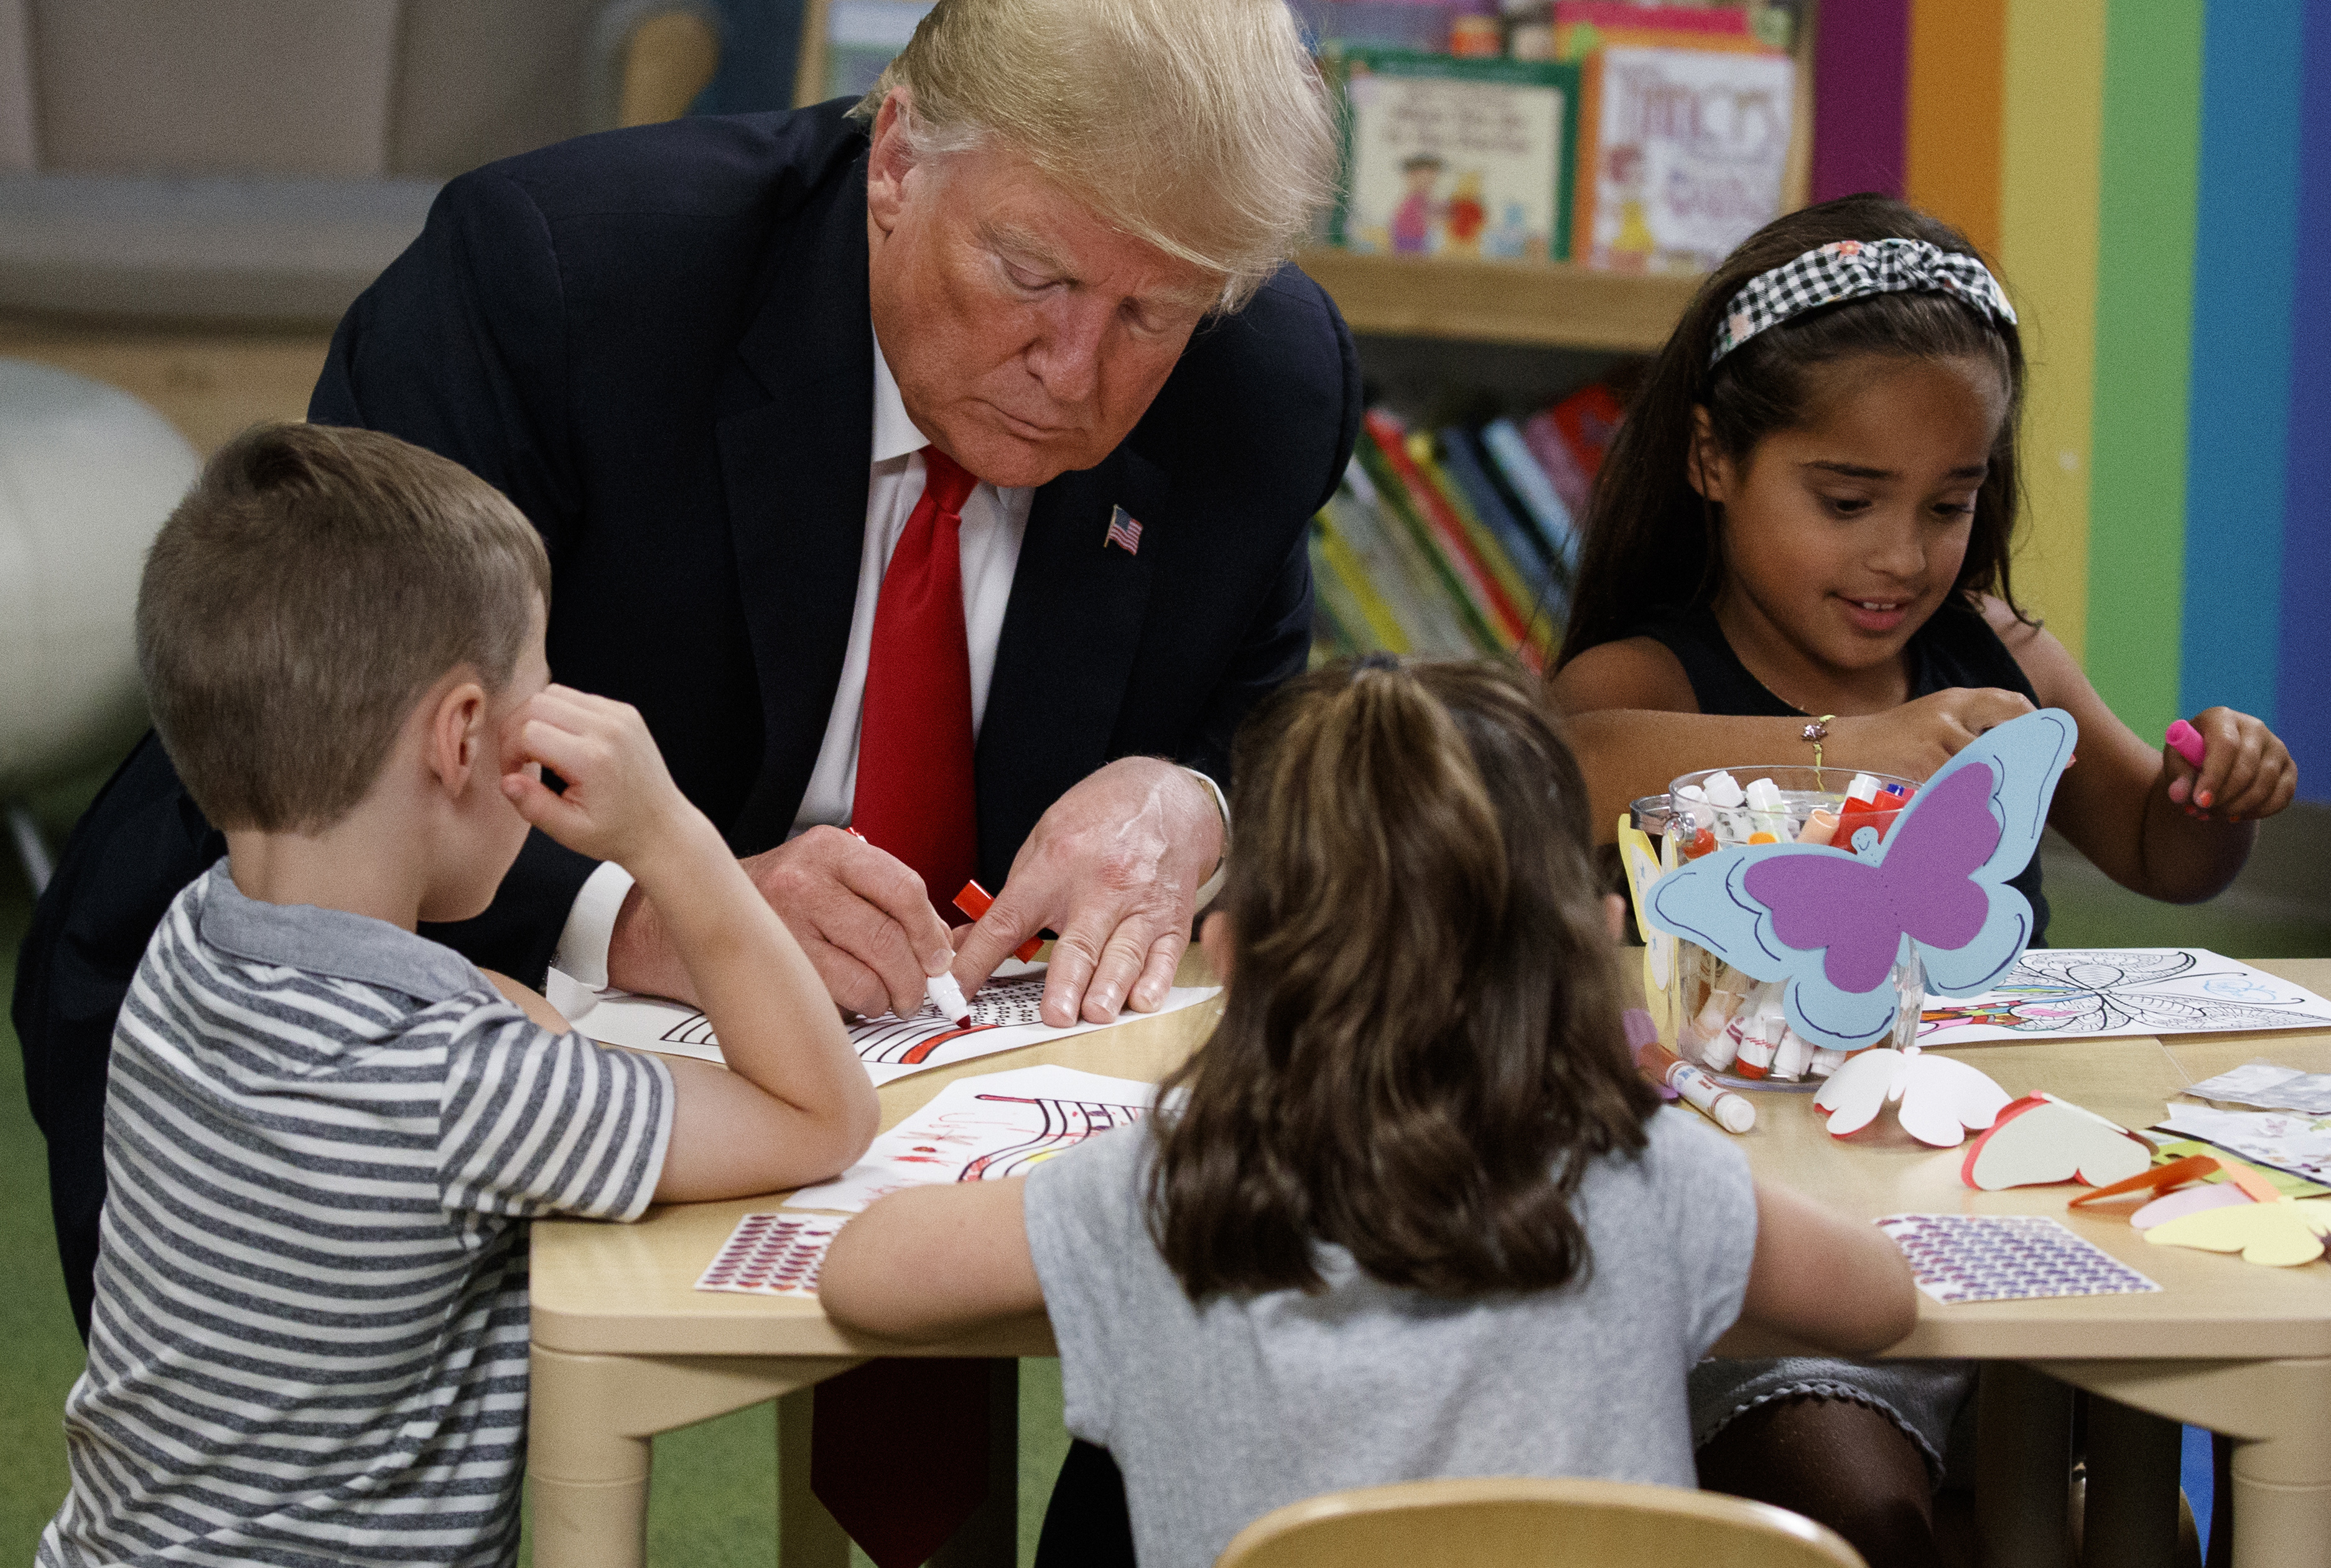 President Trump colors during a visit with a group of children at the Nationwide Children's Hospital on Aug. 24, 2018, in Columbus, Ohio. 